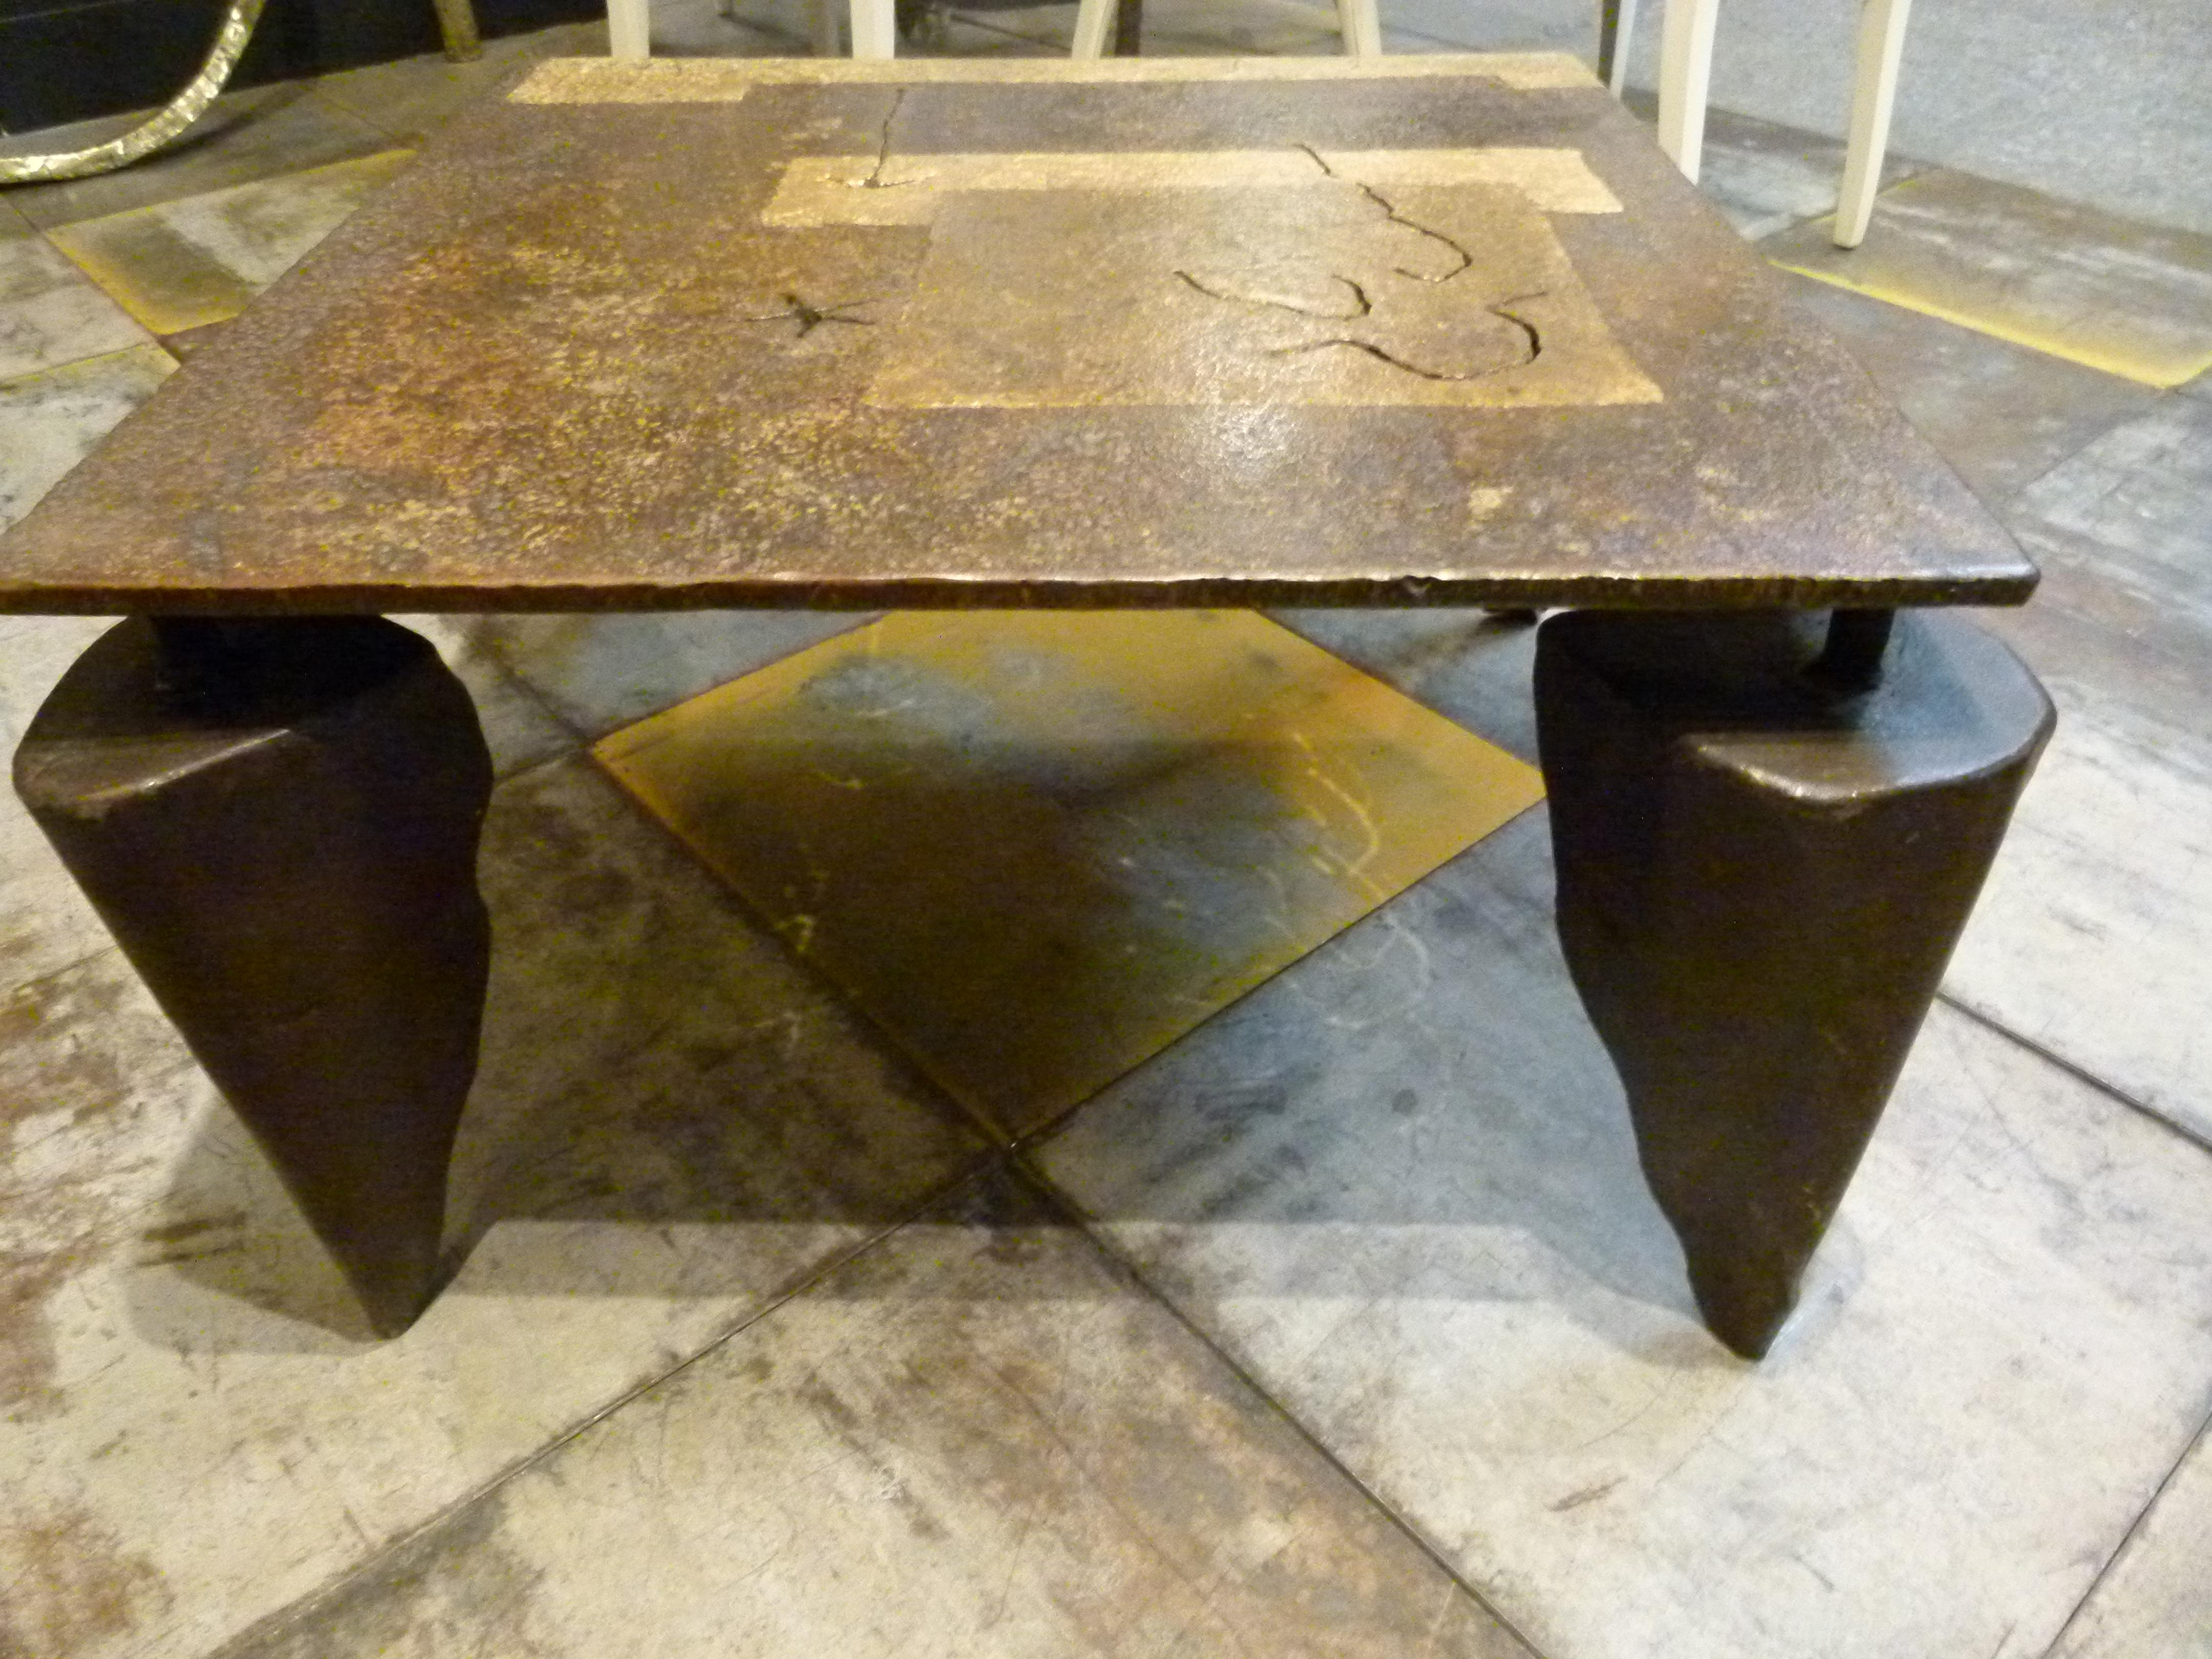 This decorative table from Jean-Jaques Argueyrolles, is itself piece of art. The way in he mixes materials, is unique, and makes this piece of furniture an irrepetible work of art. 
The top is a mix of recycled ship Iron with gold leaf and the four